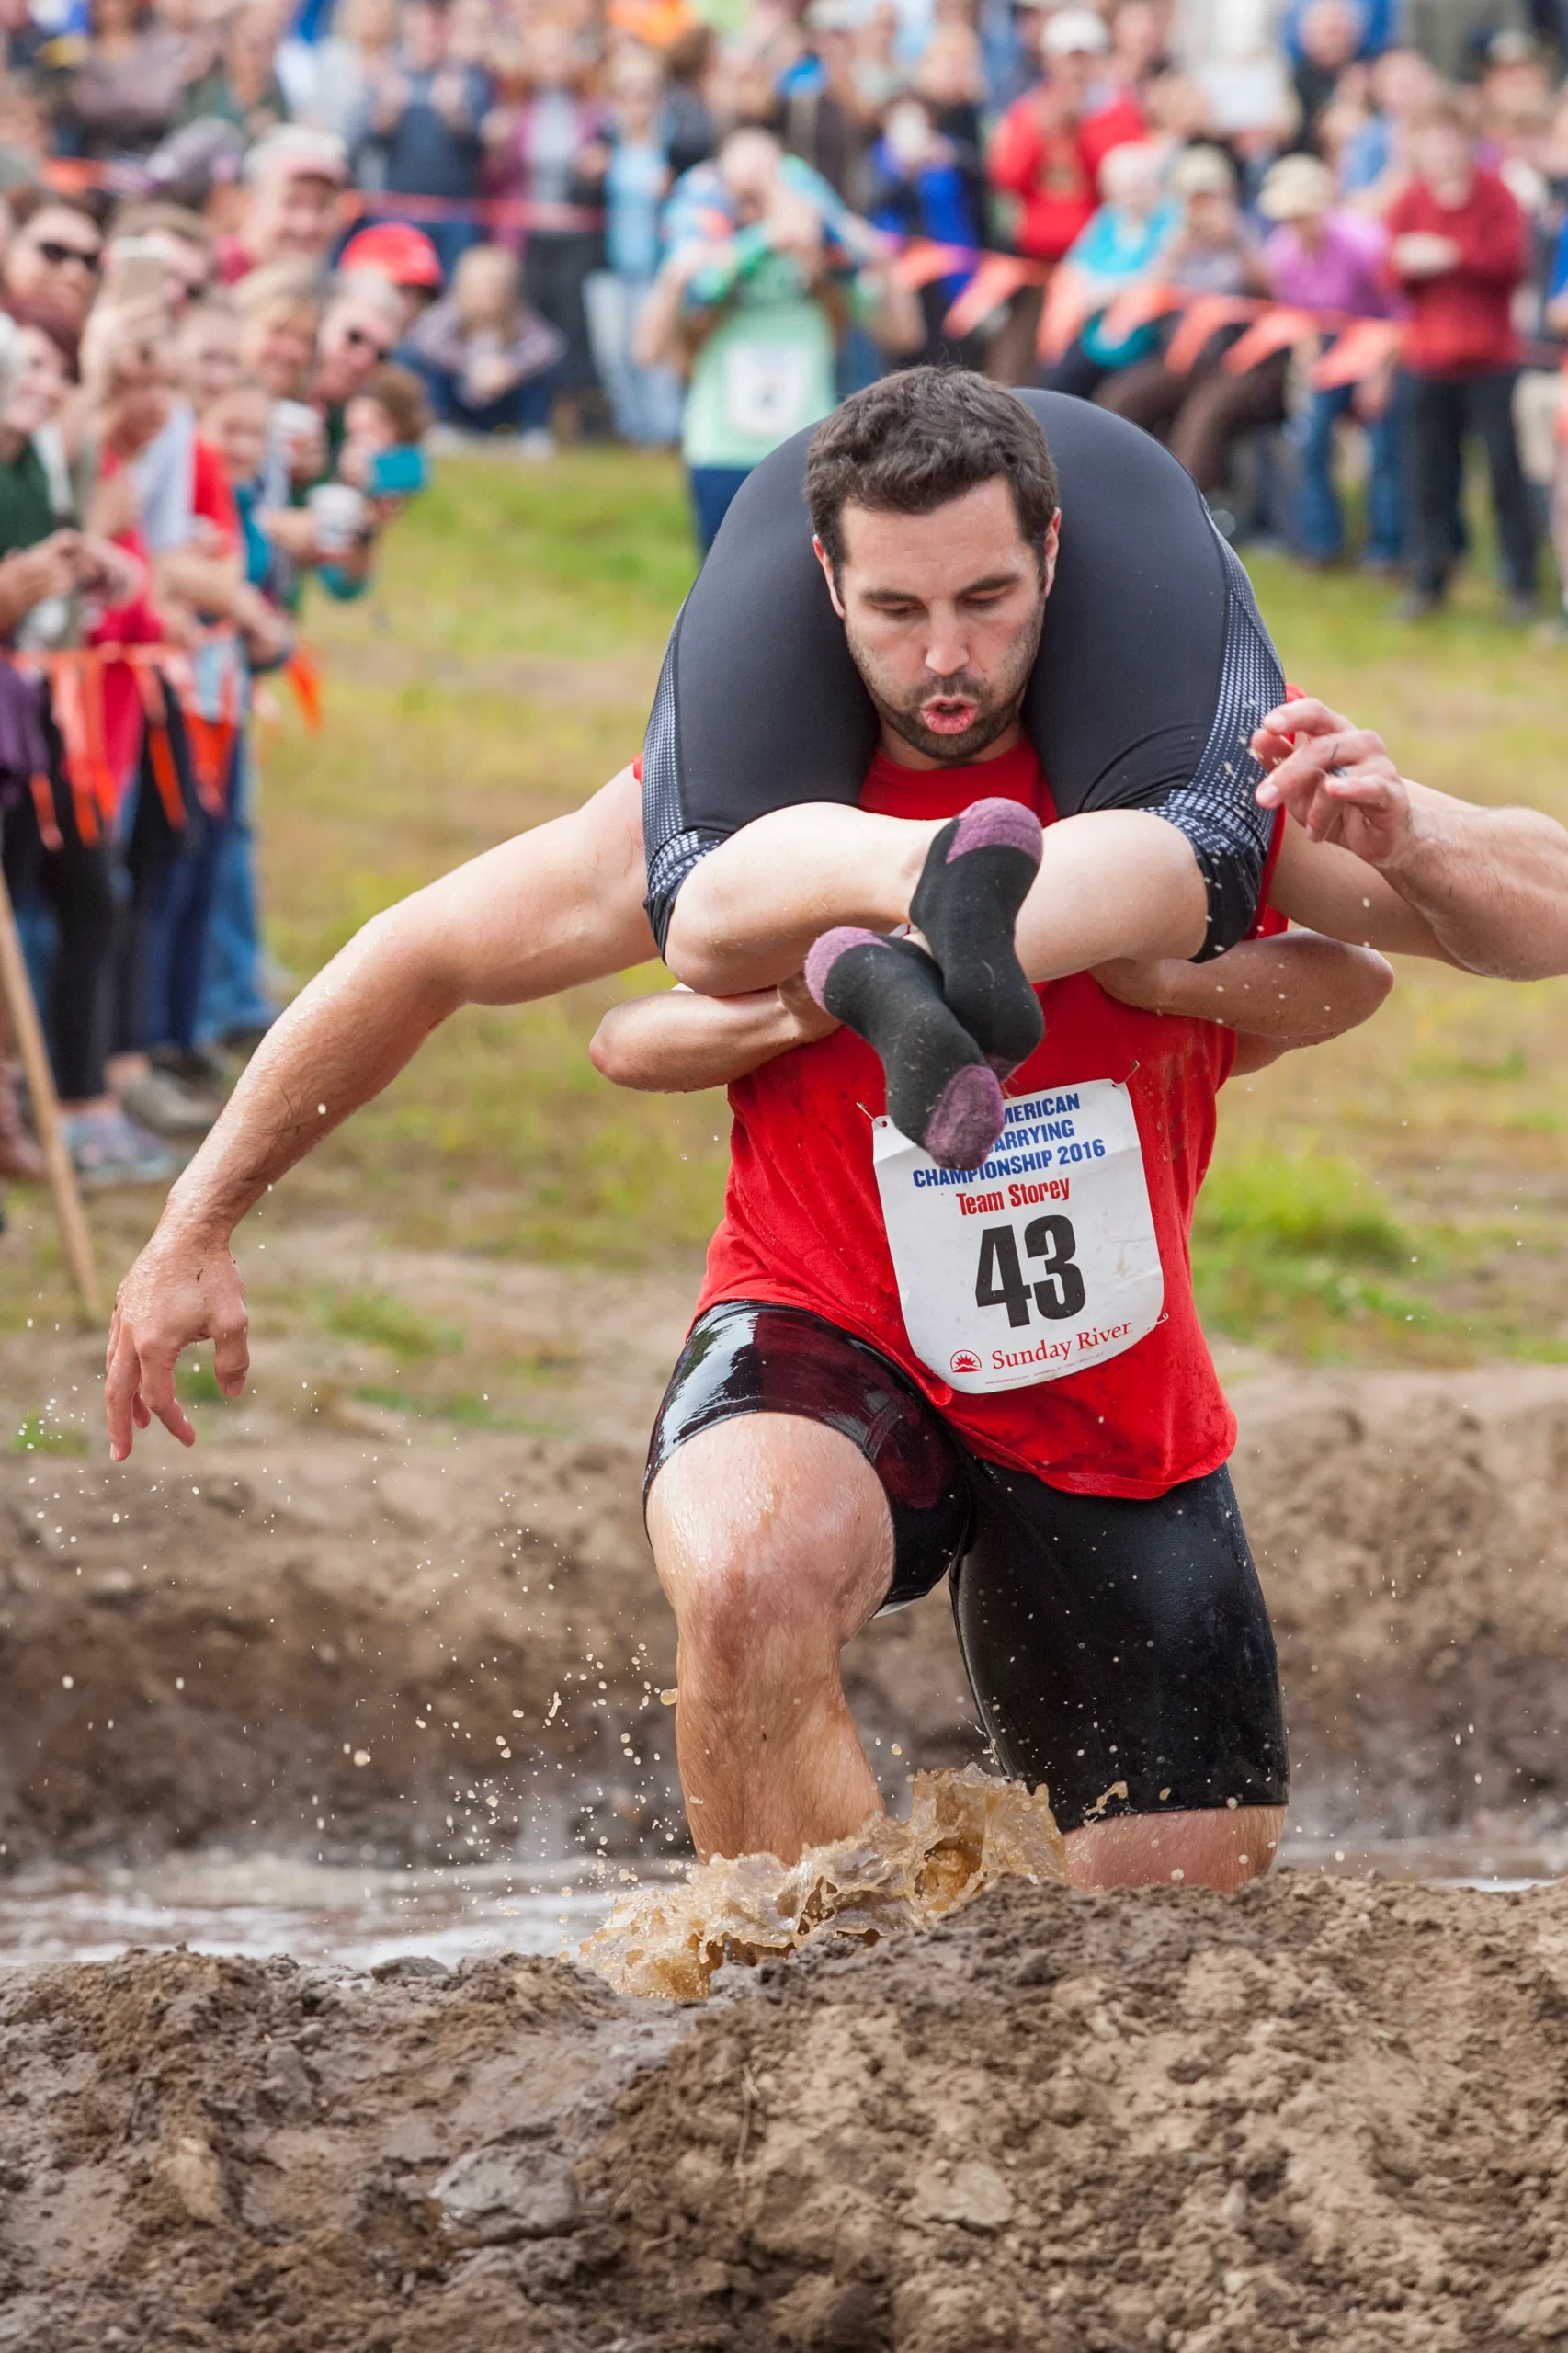 A man carrying a woman during the North American Wife Carrying Championship in Newry, Maine.